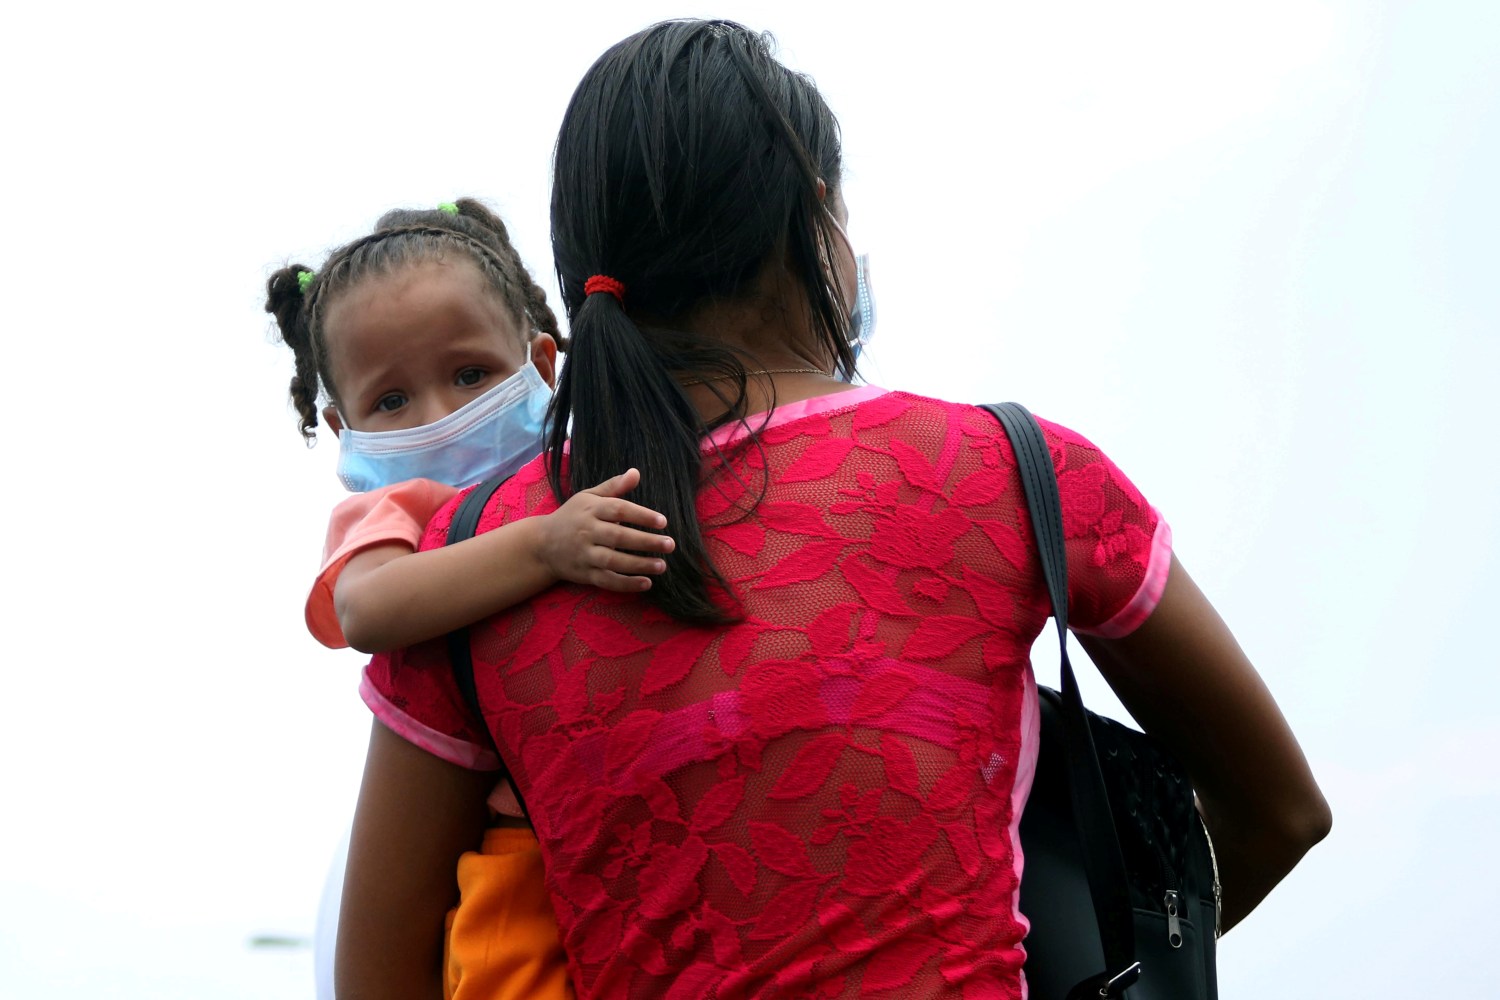 A child wearing protective face mask is carried across the border between Colombia and Venezuela at Simon Bolivar international bridge in Cucuta, Colombia March 12, 2020. REUTERS/Carlos Eduardo Ramirez     TPX IMAGES OF THE DAY